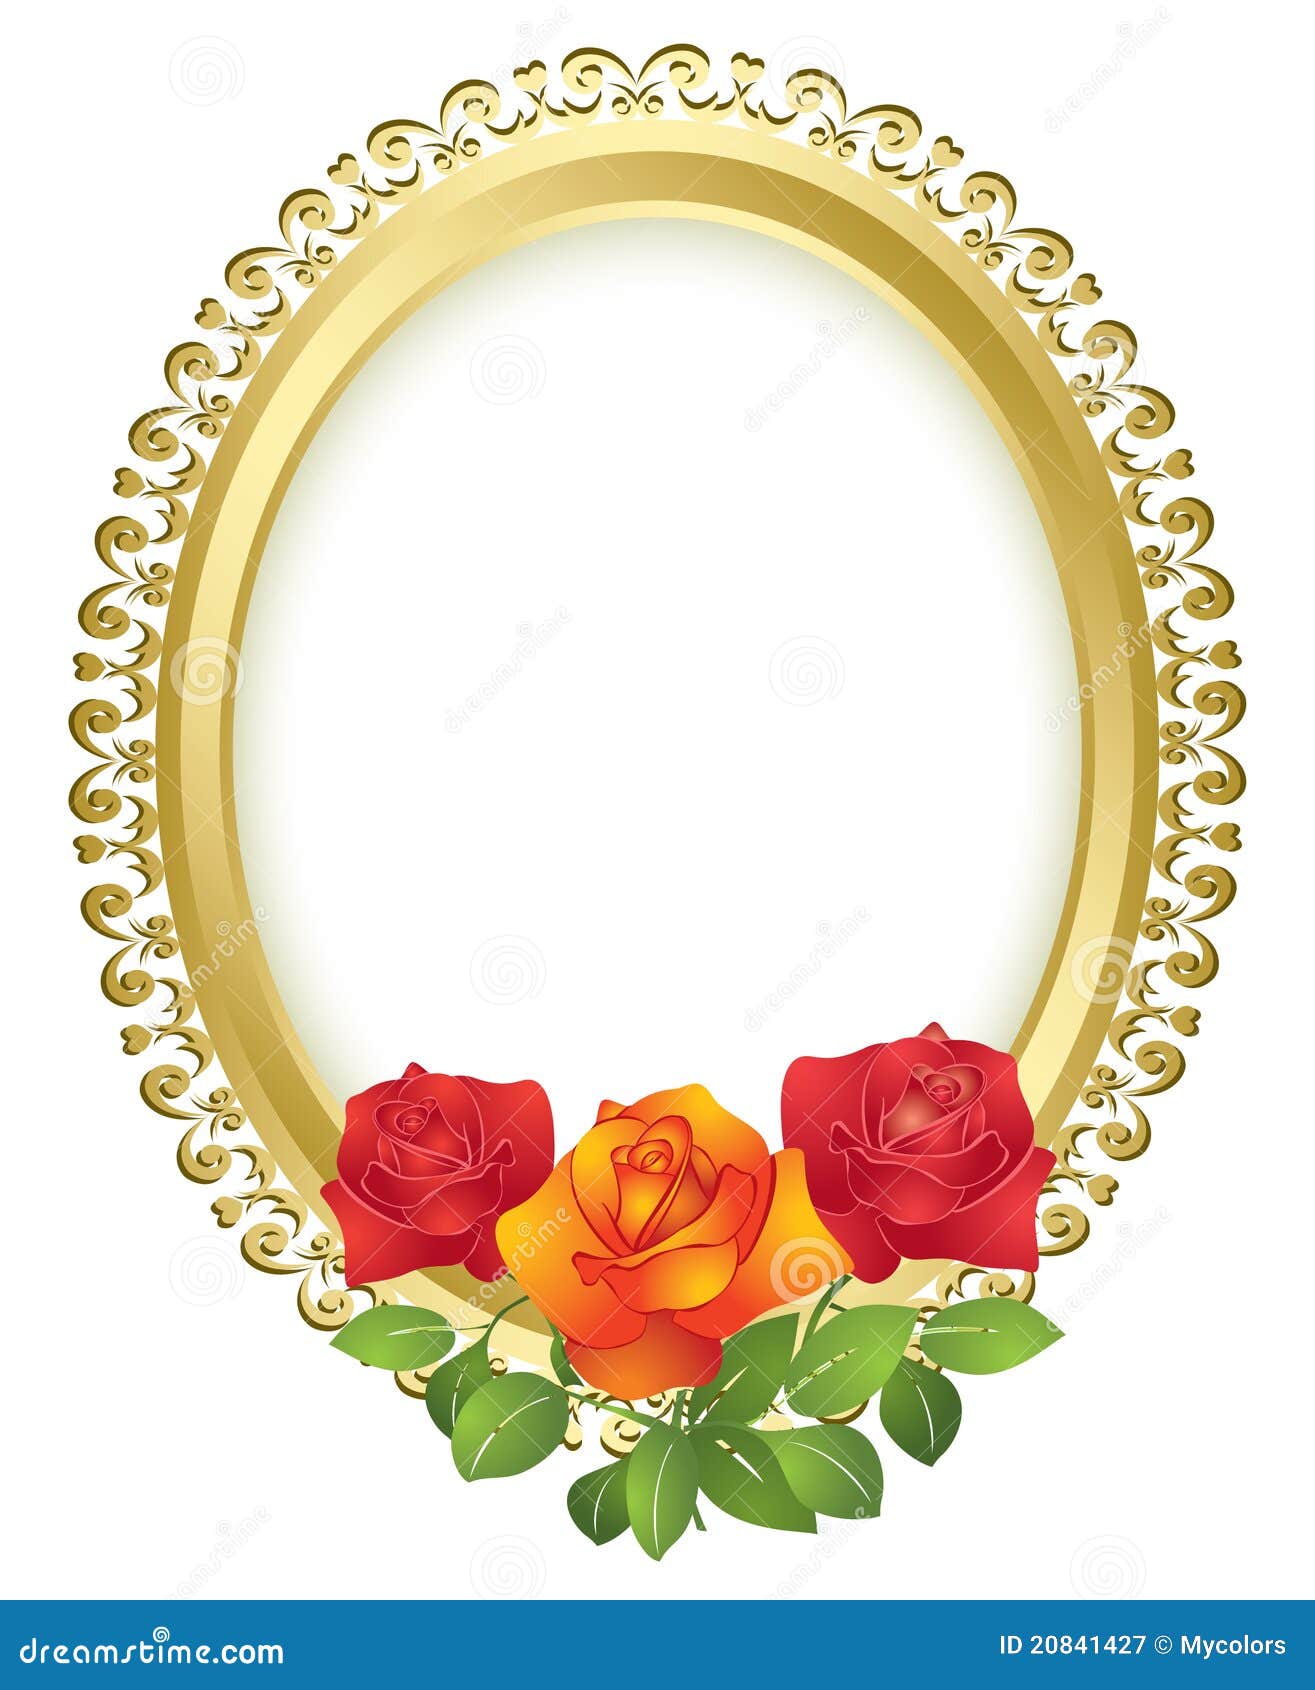  oval golden frame with roses